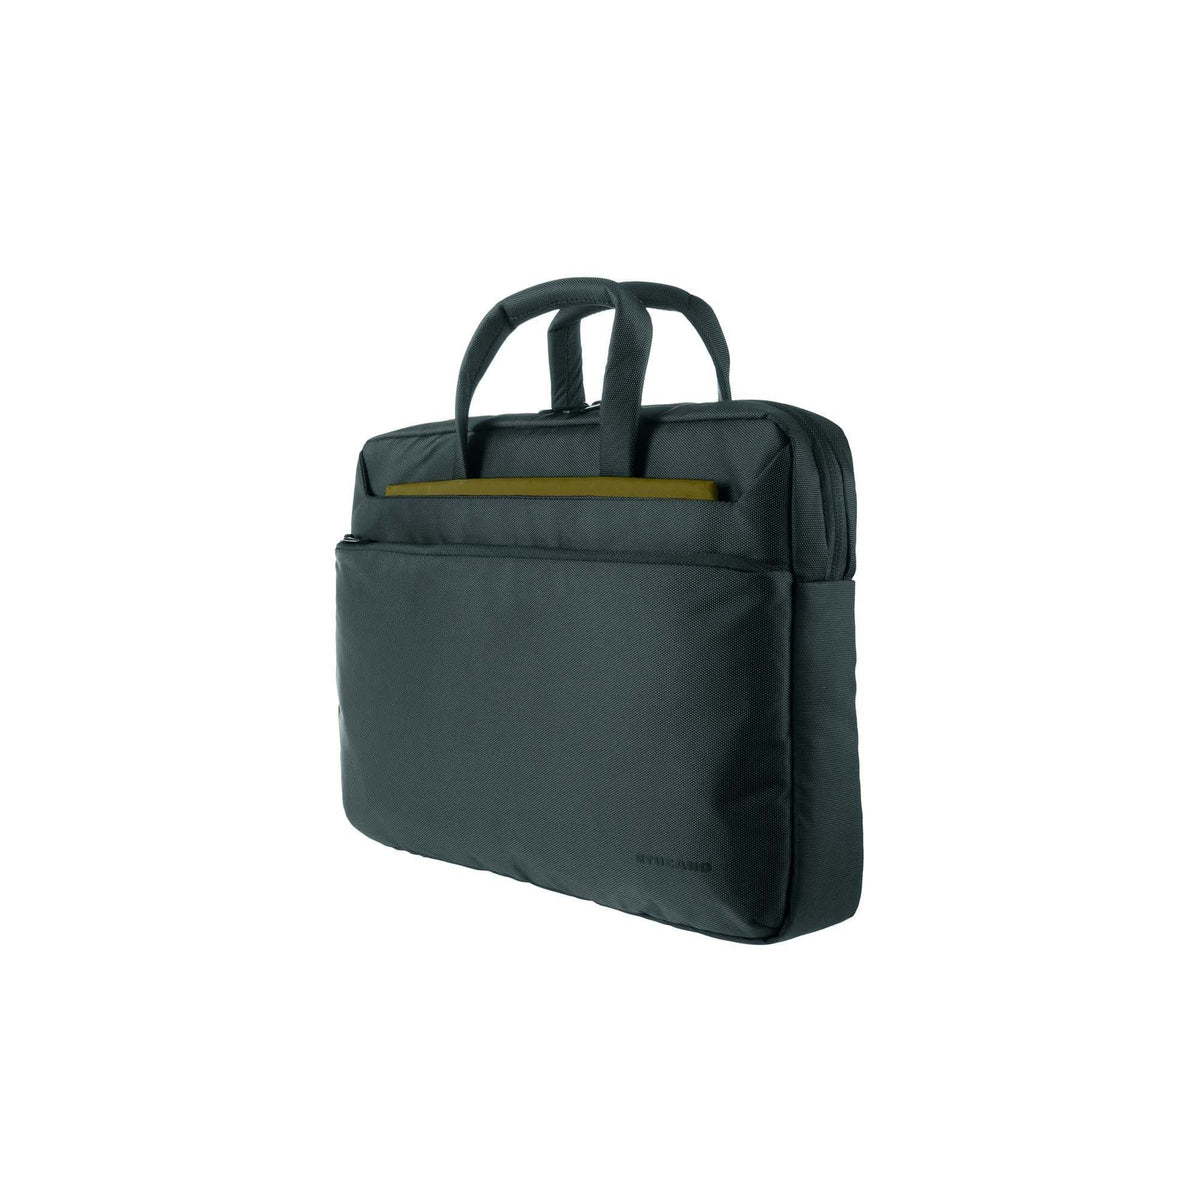 Tucano Work Out 3 Slim Bag for 13" Macbook Pro or Laptop